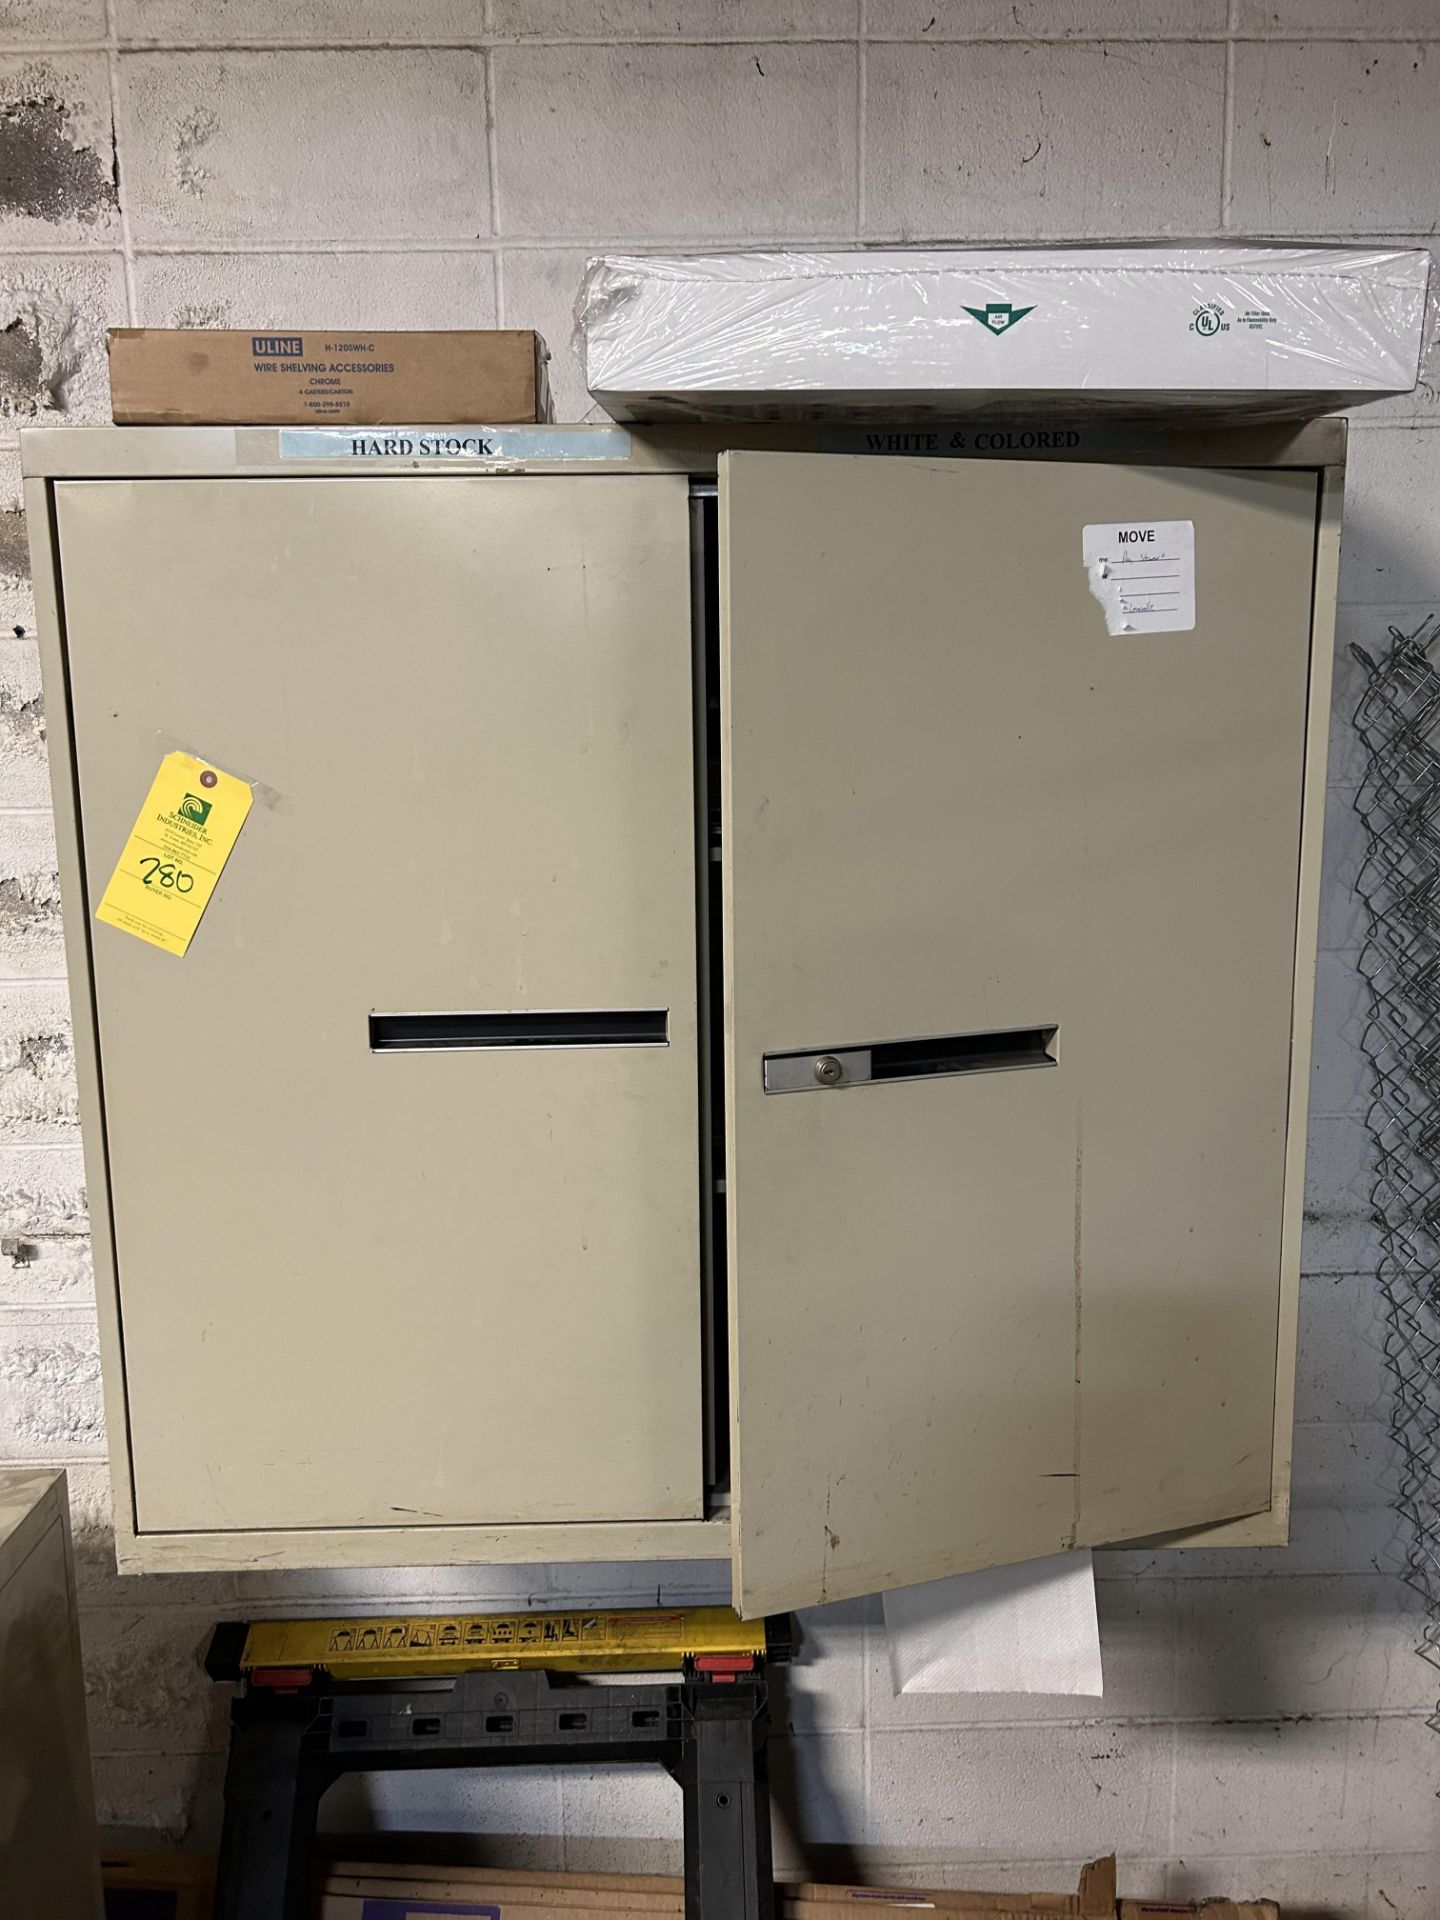 Beige Storage Cabinet, 18'' x 39'' x 42'' (No Contents), Rigging/Loading Fee: $40 - Image 2 of 3